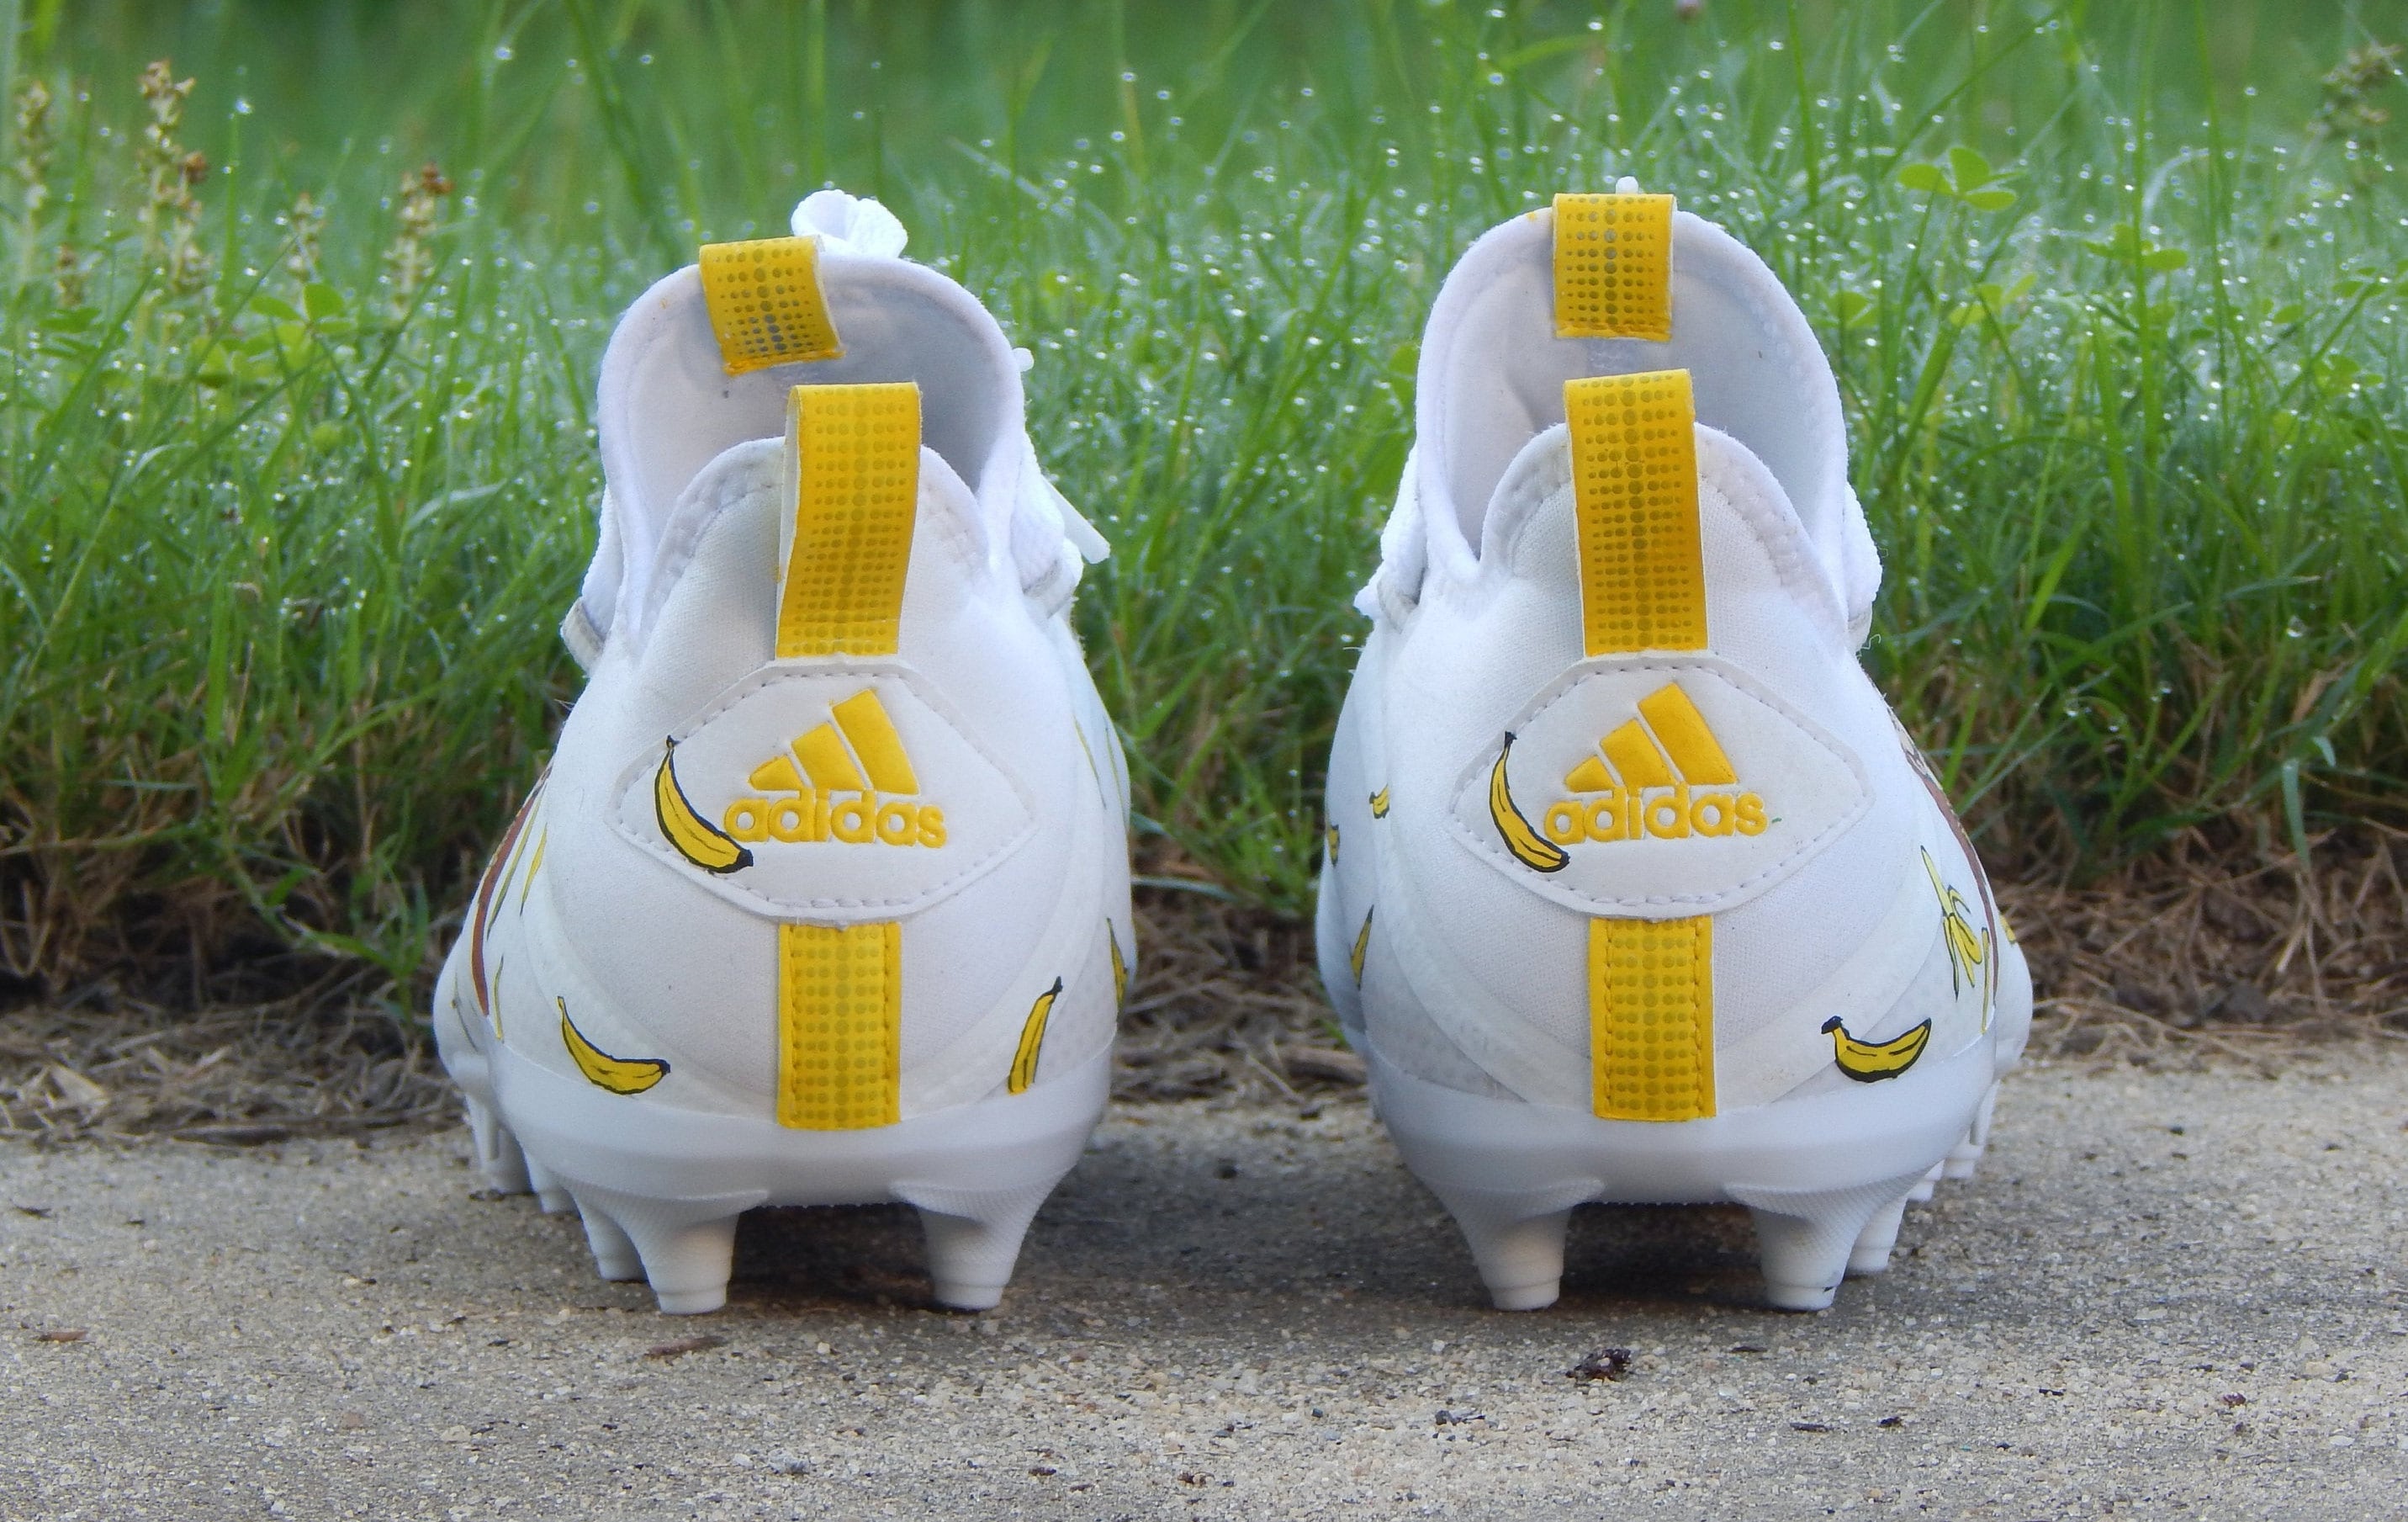 Custom Adidas Supreme Football Cleats for Sale in New Orleans